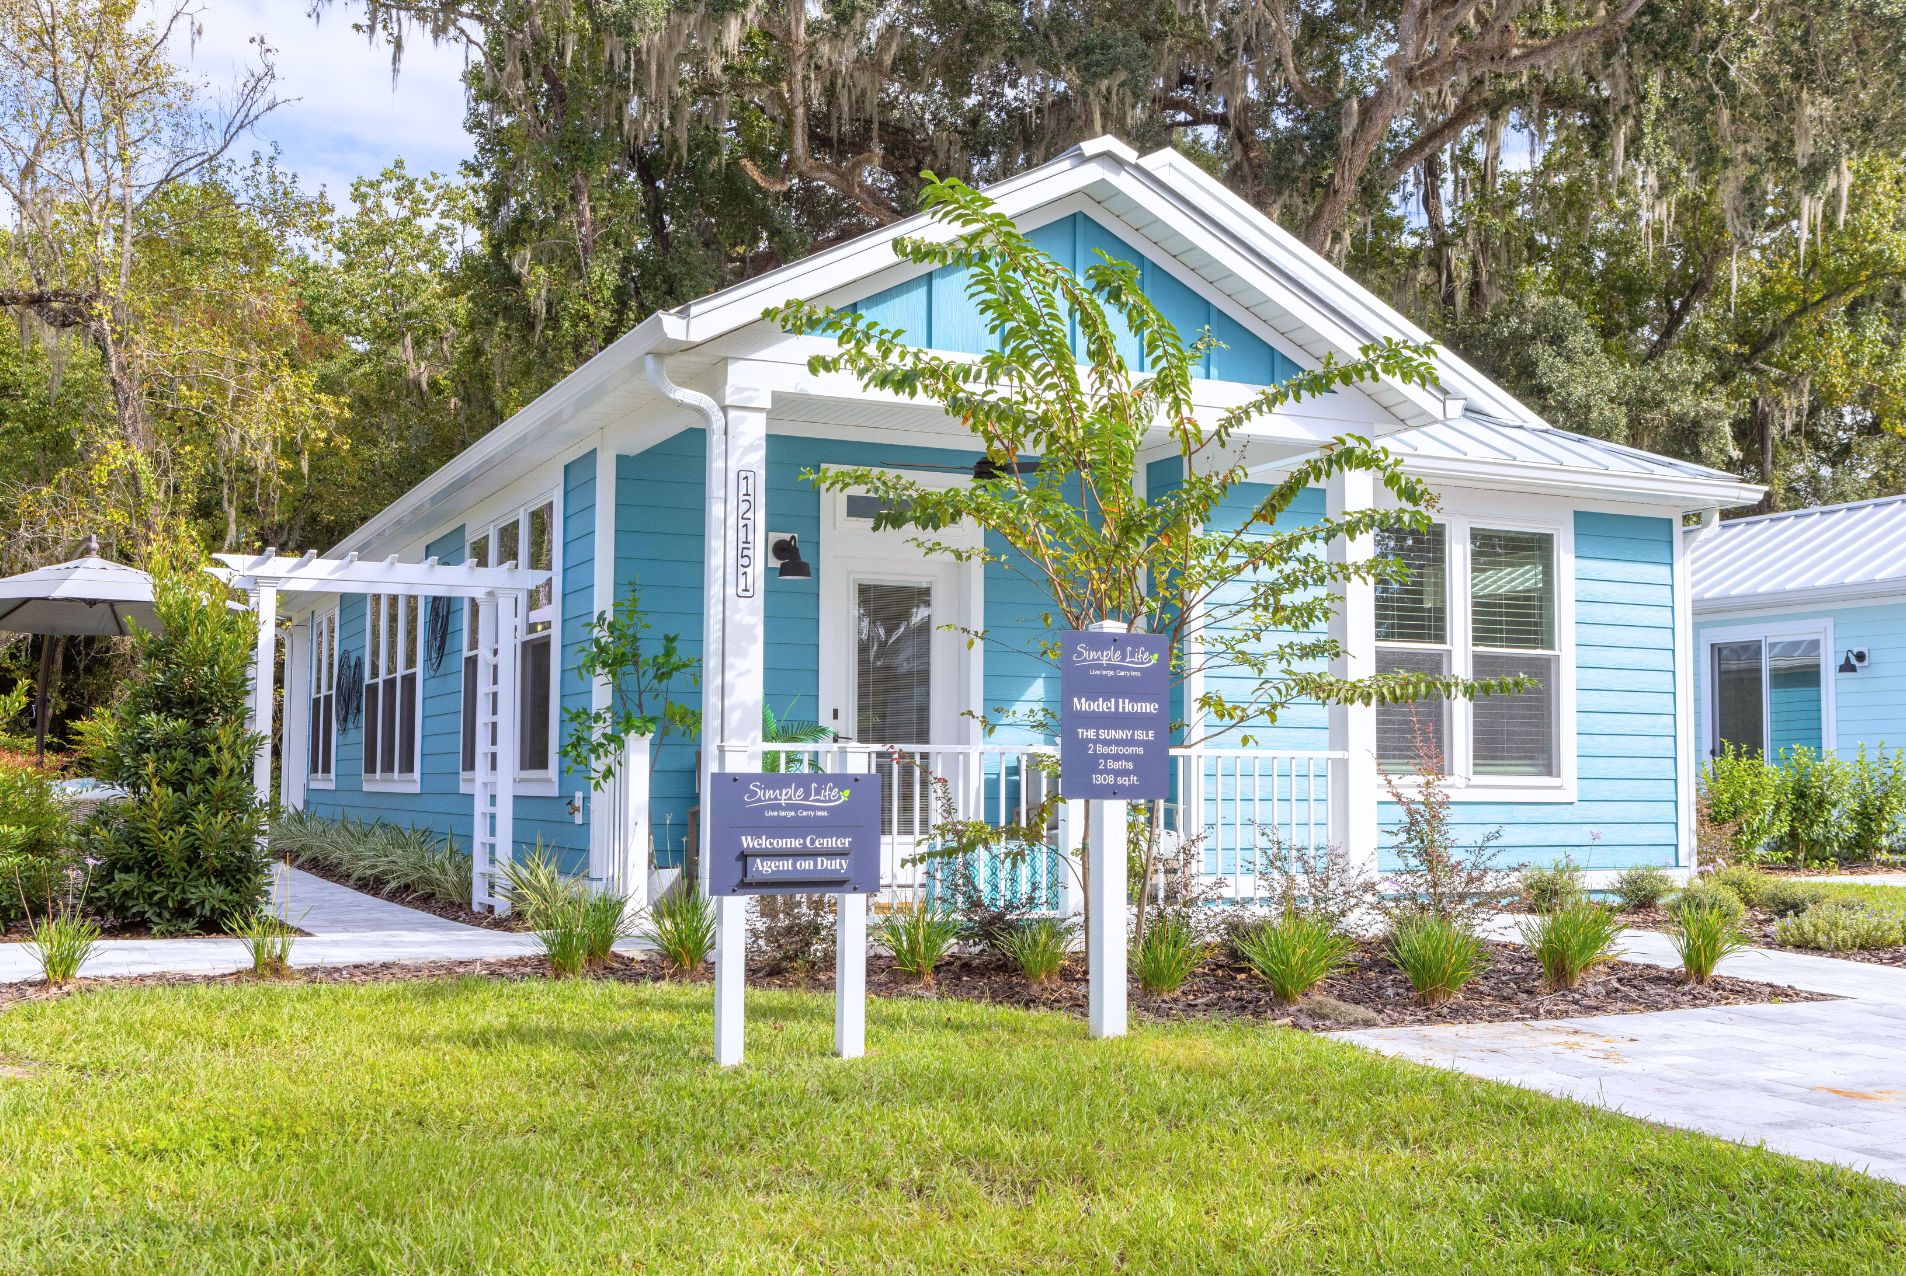 Sunny Isle cottage home exterior at Lakeshore by Simple Life.